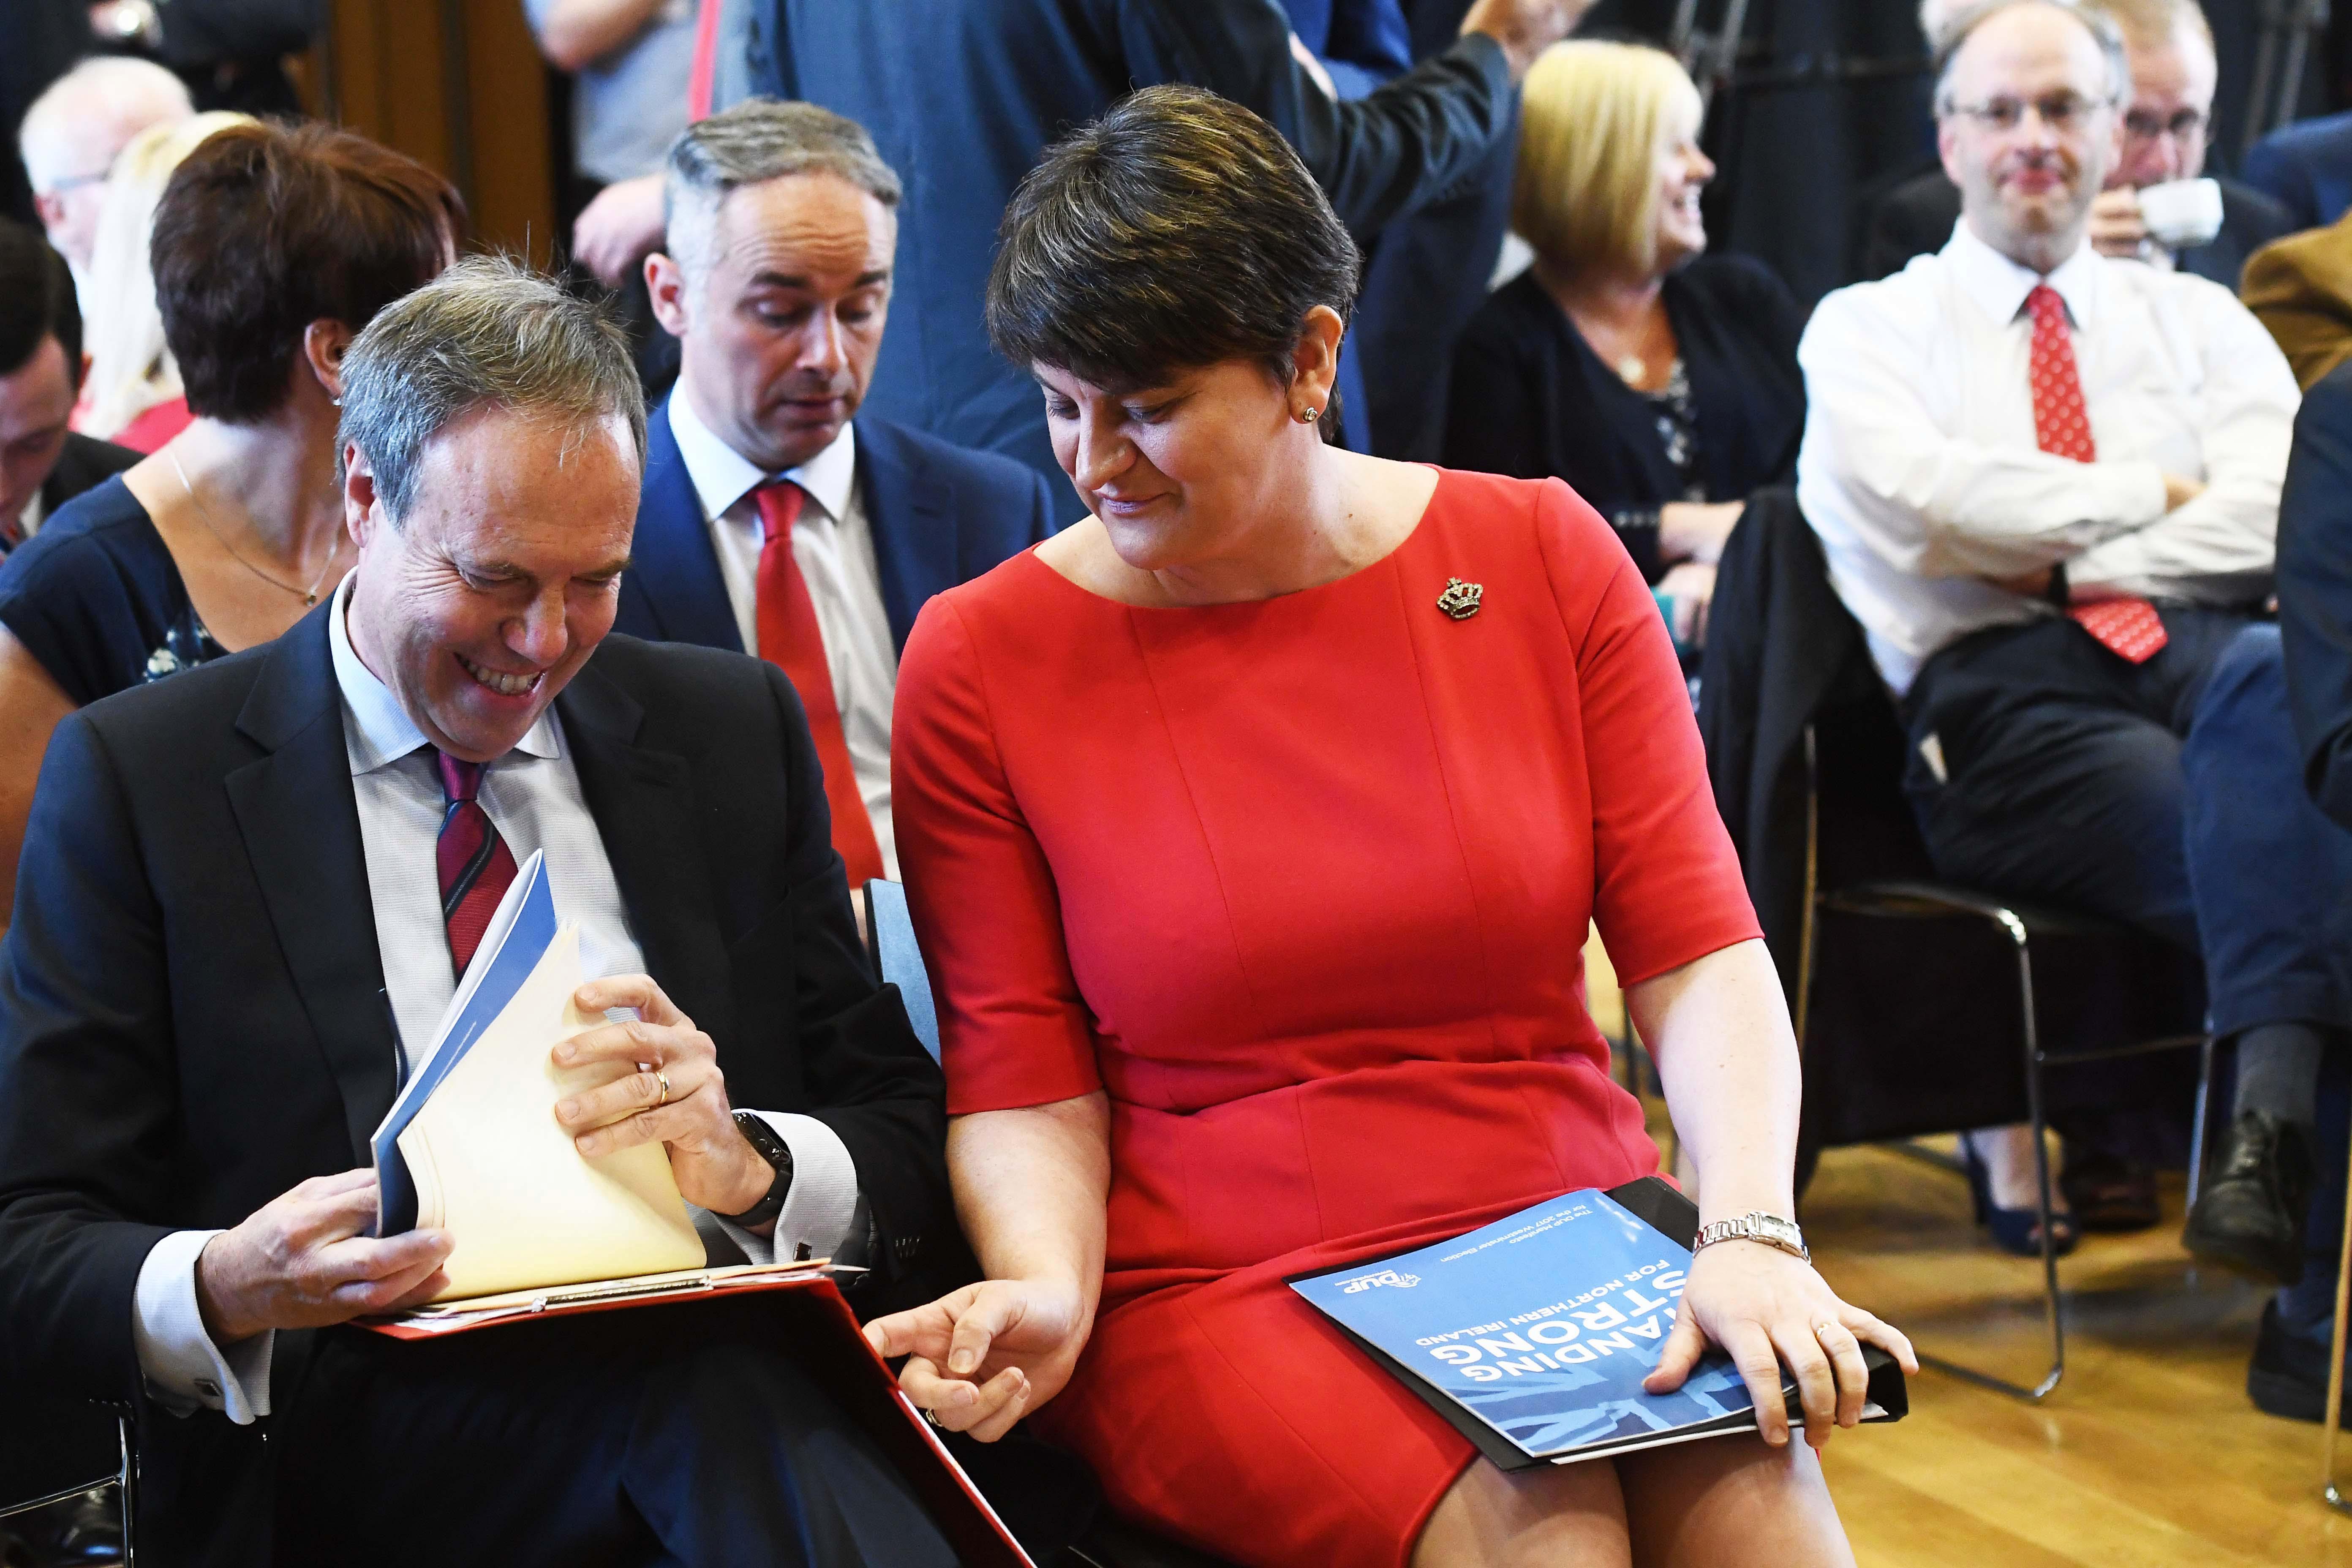 DUP leader Arlene Foster and Nigel Dodds during the election campaign